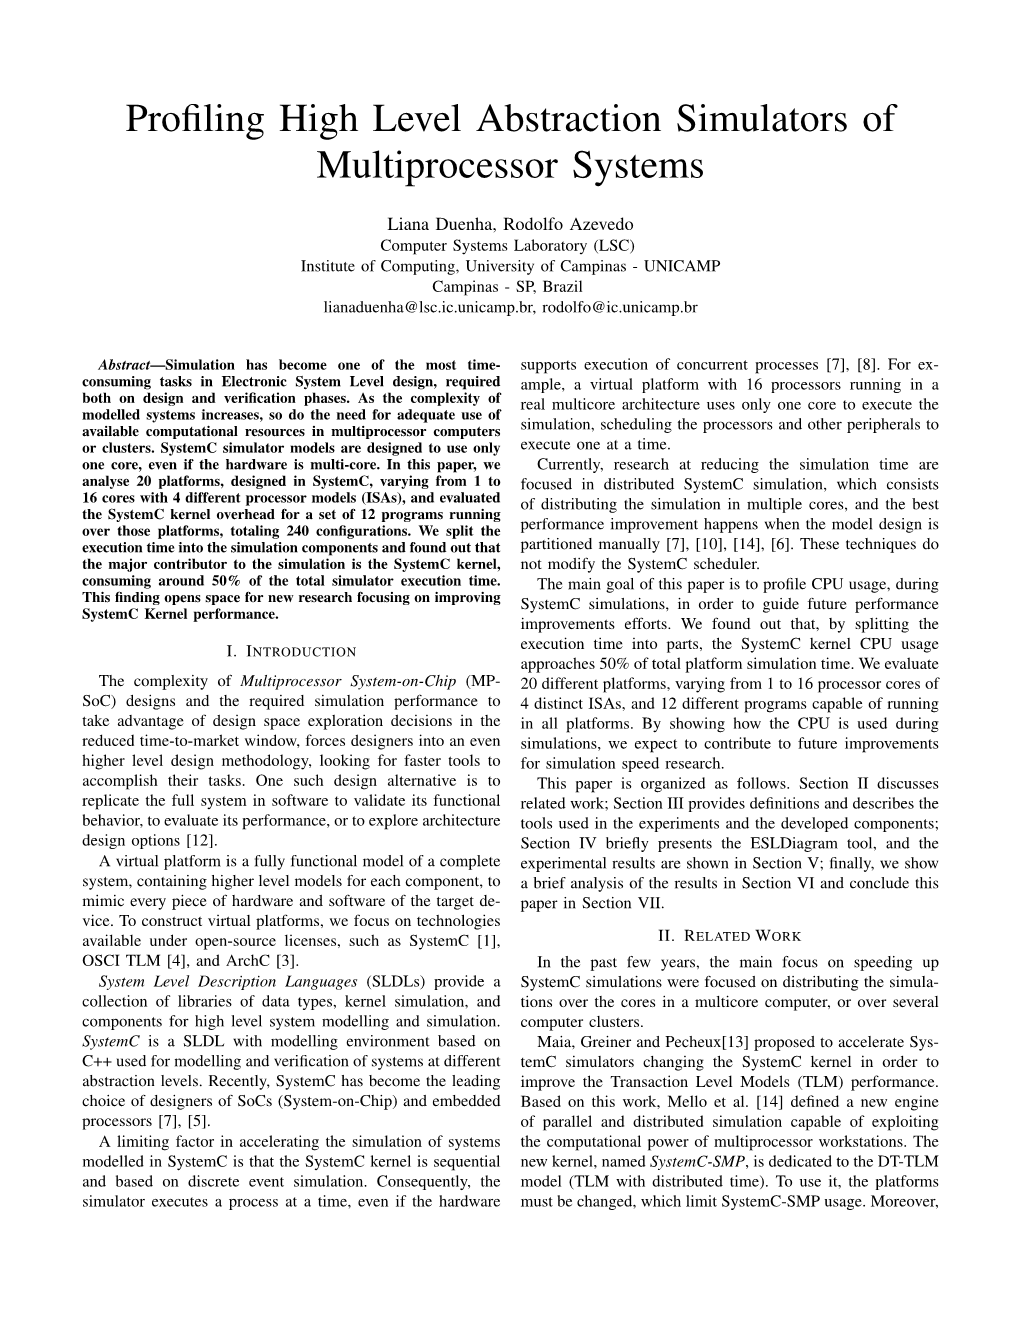 Profiling High Level Abstraction Simulators of Multiprocessor Systems